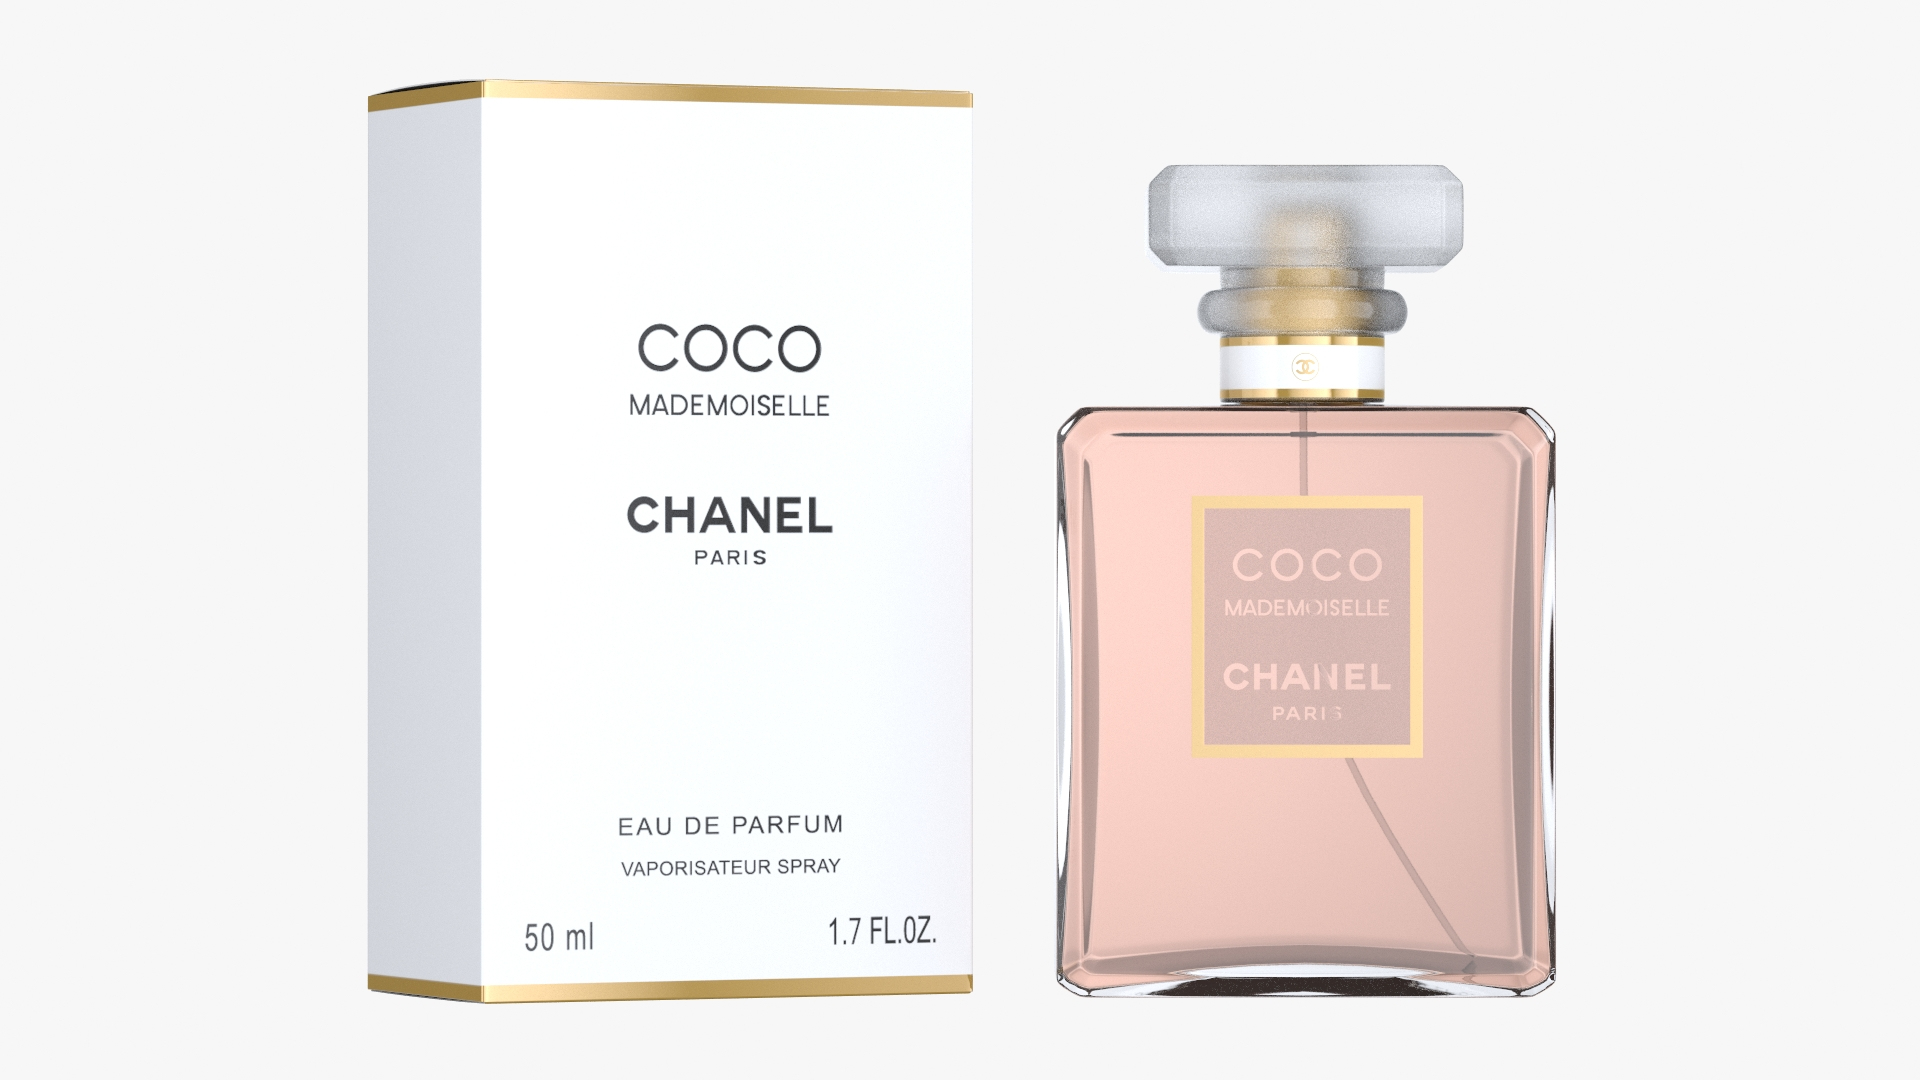 Chanel Perfume Bottles With Boxes 3D - TurboSquid 1880890